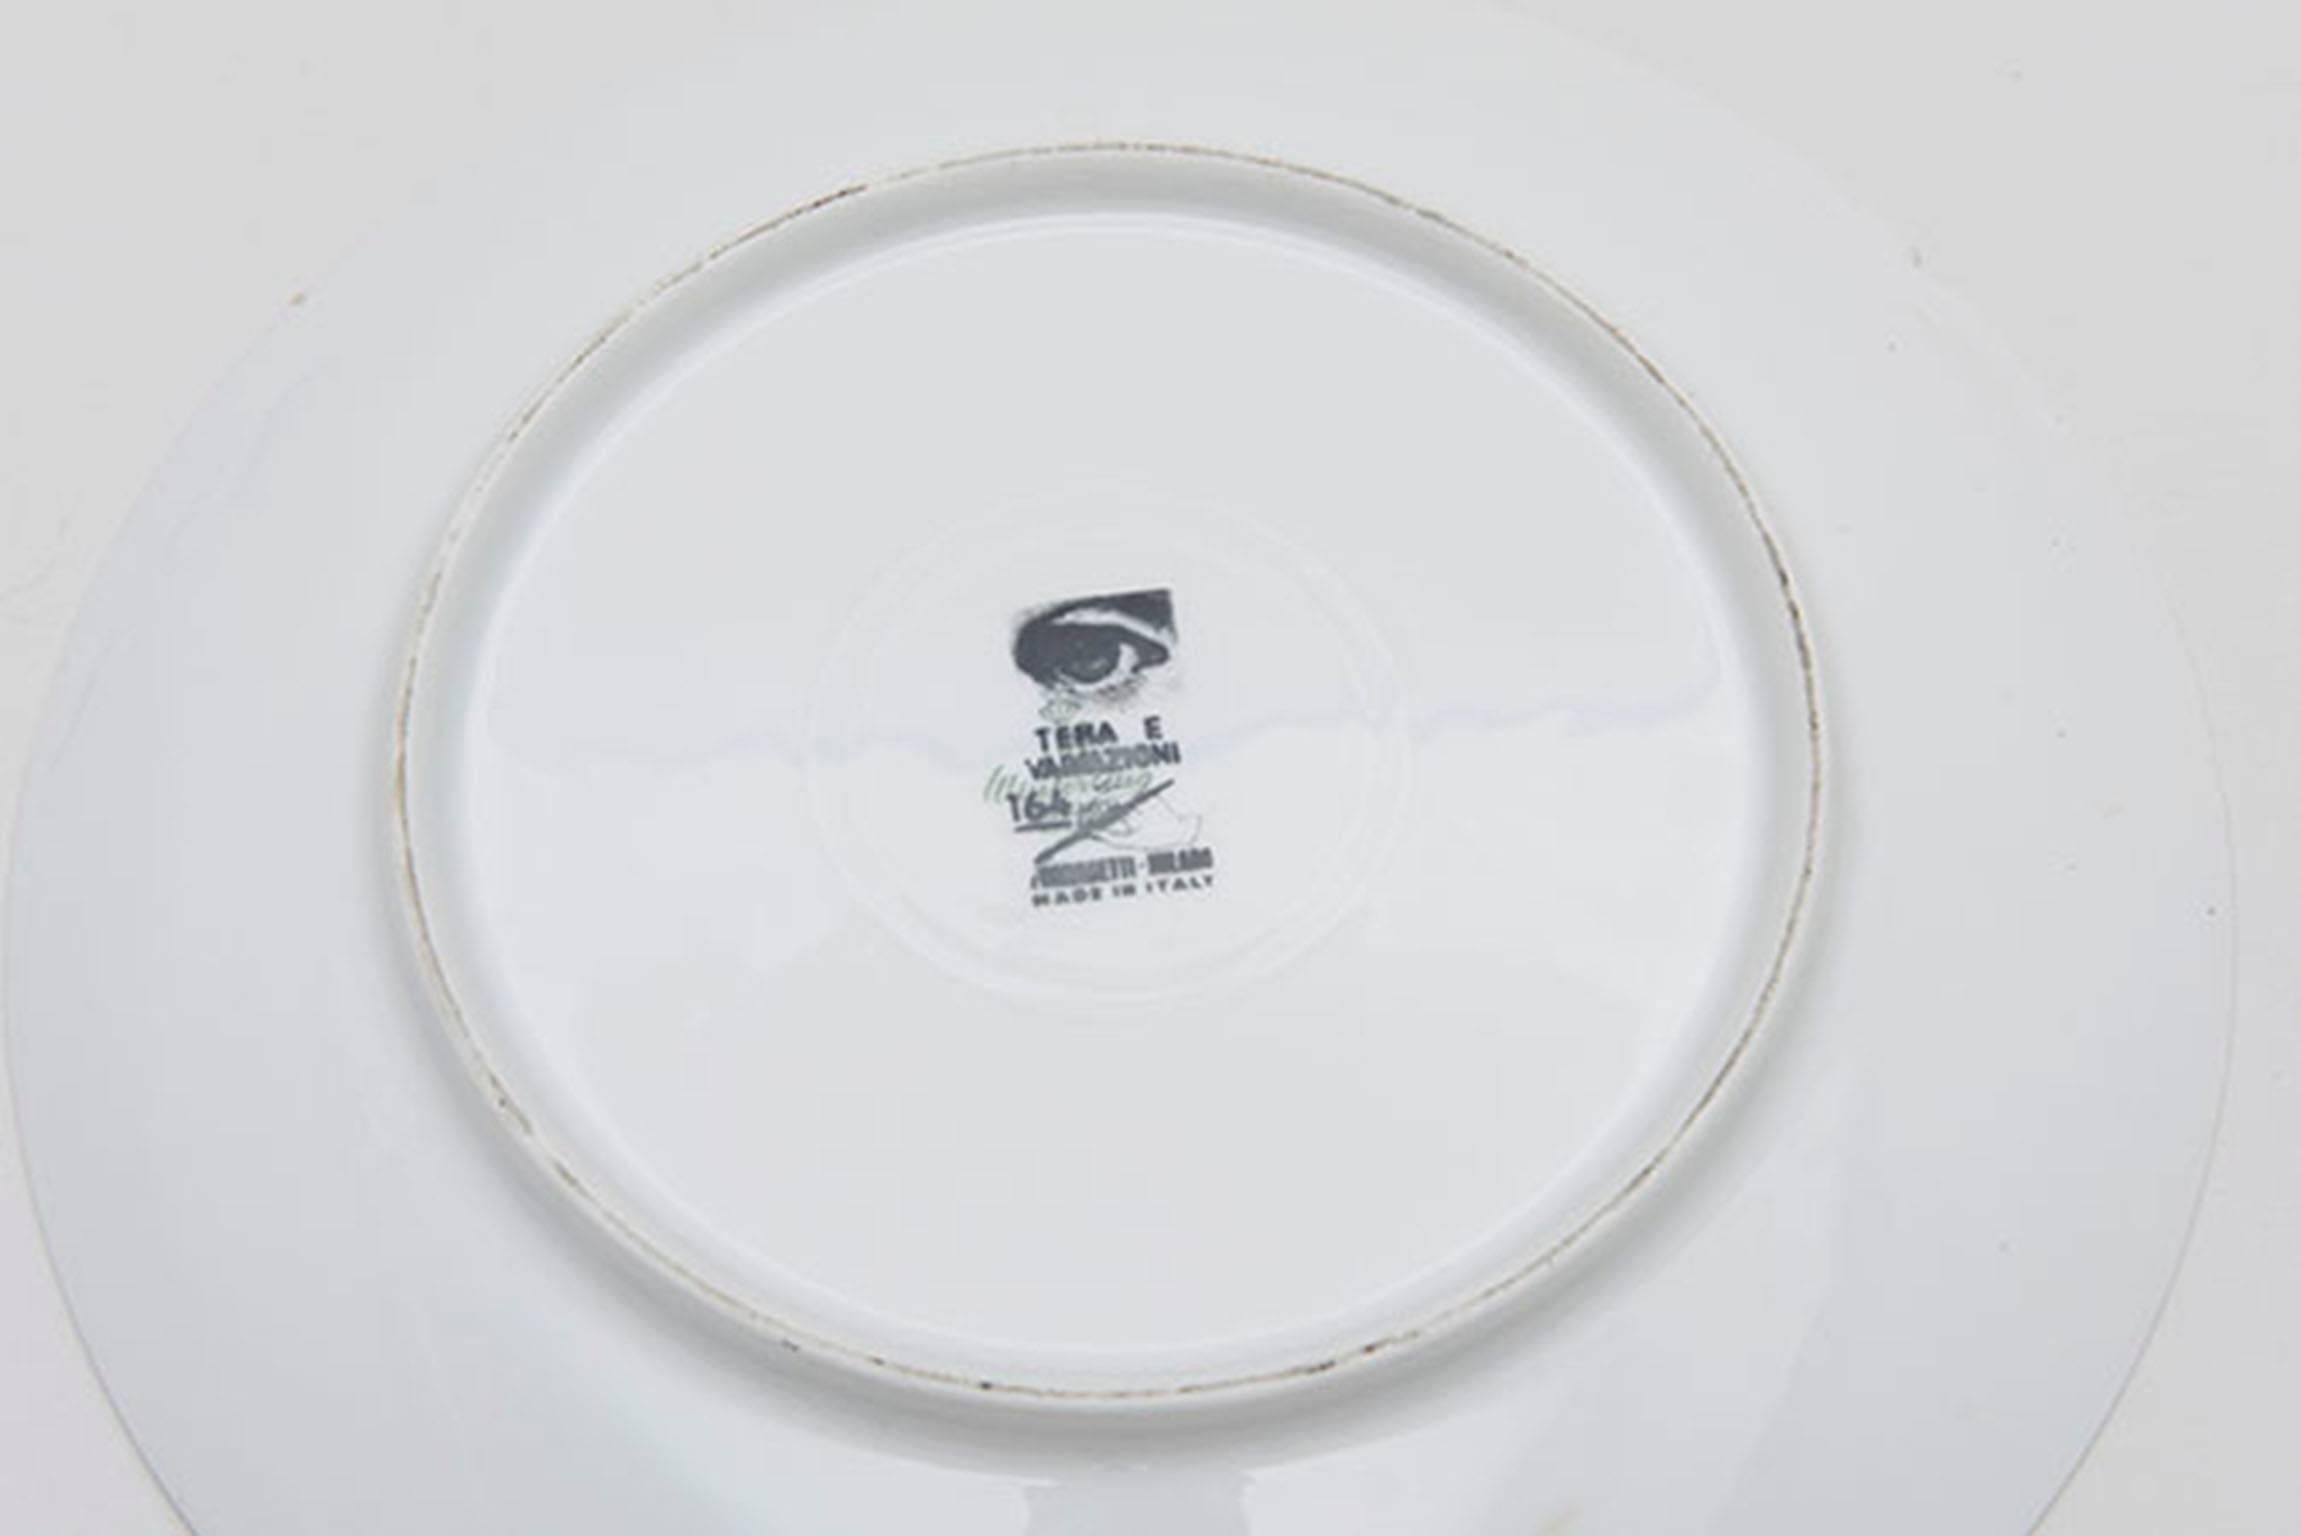 Early Themes and Variations plate designed by Piero Fornasetti. Fine white porcelain with black and white lithographic illustration. Underside of plate with 